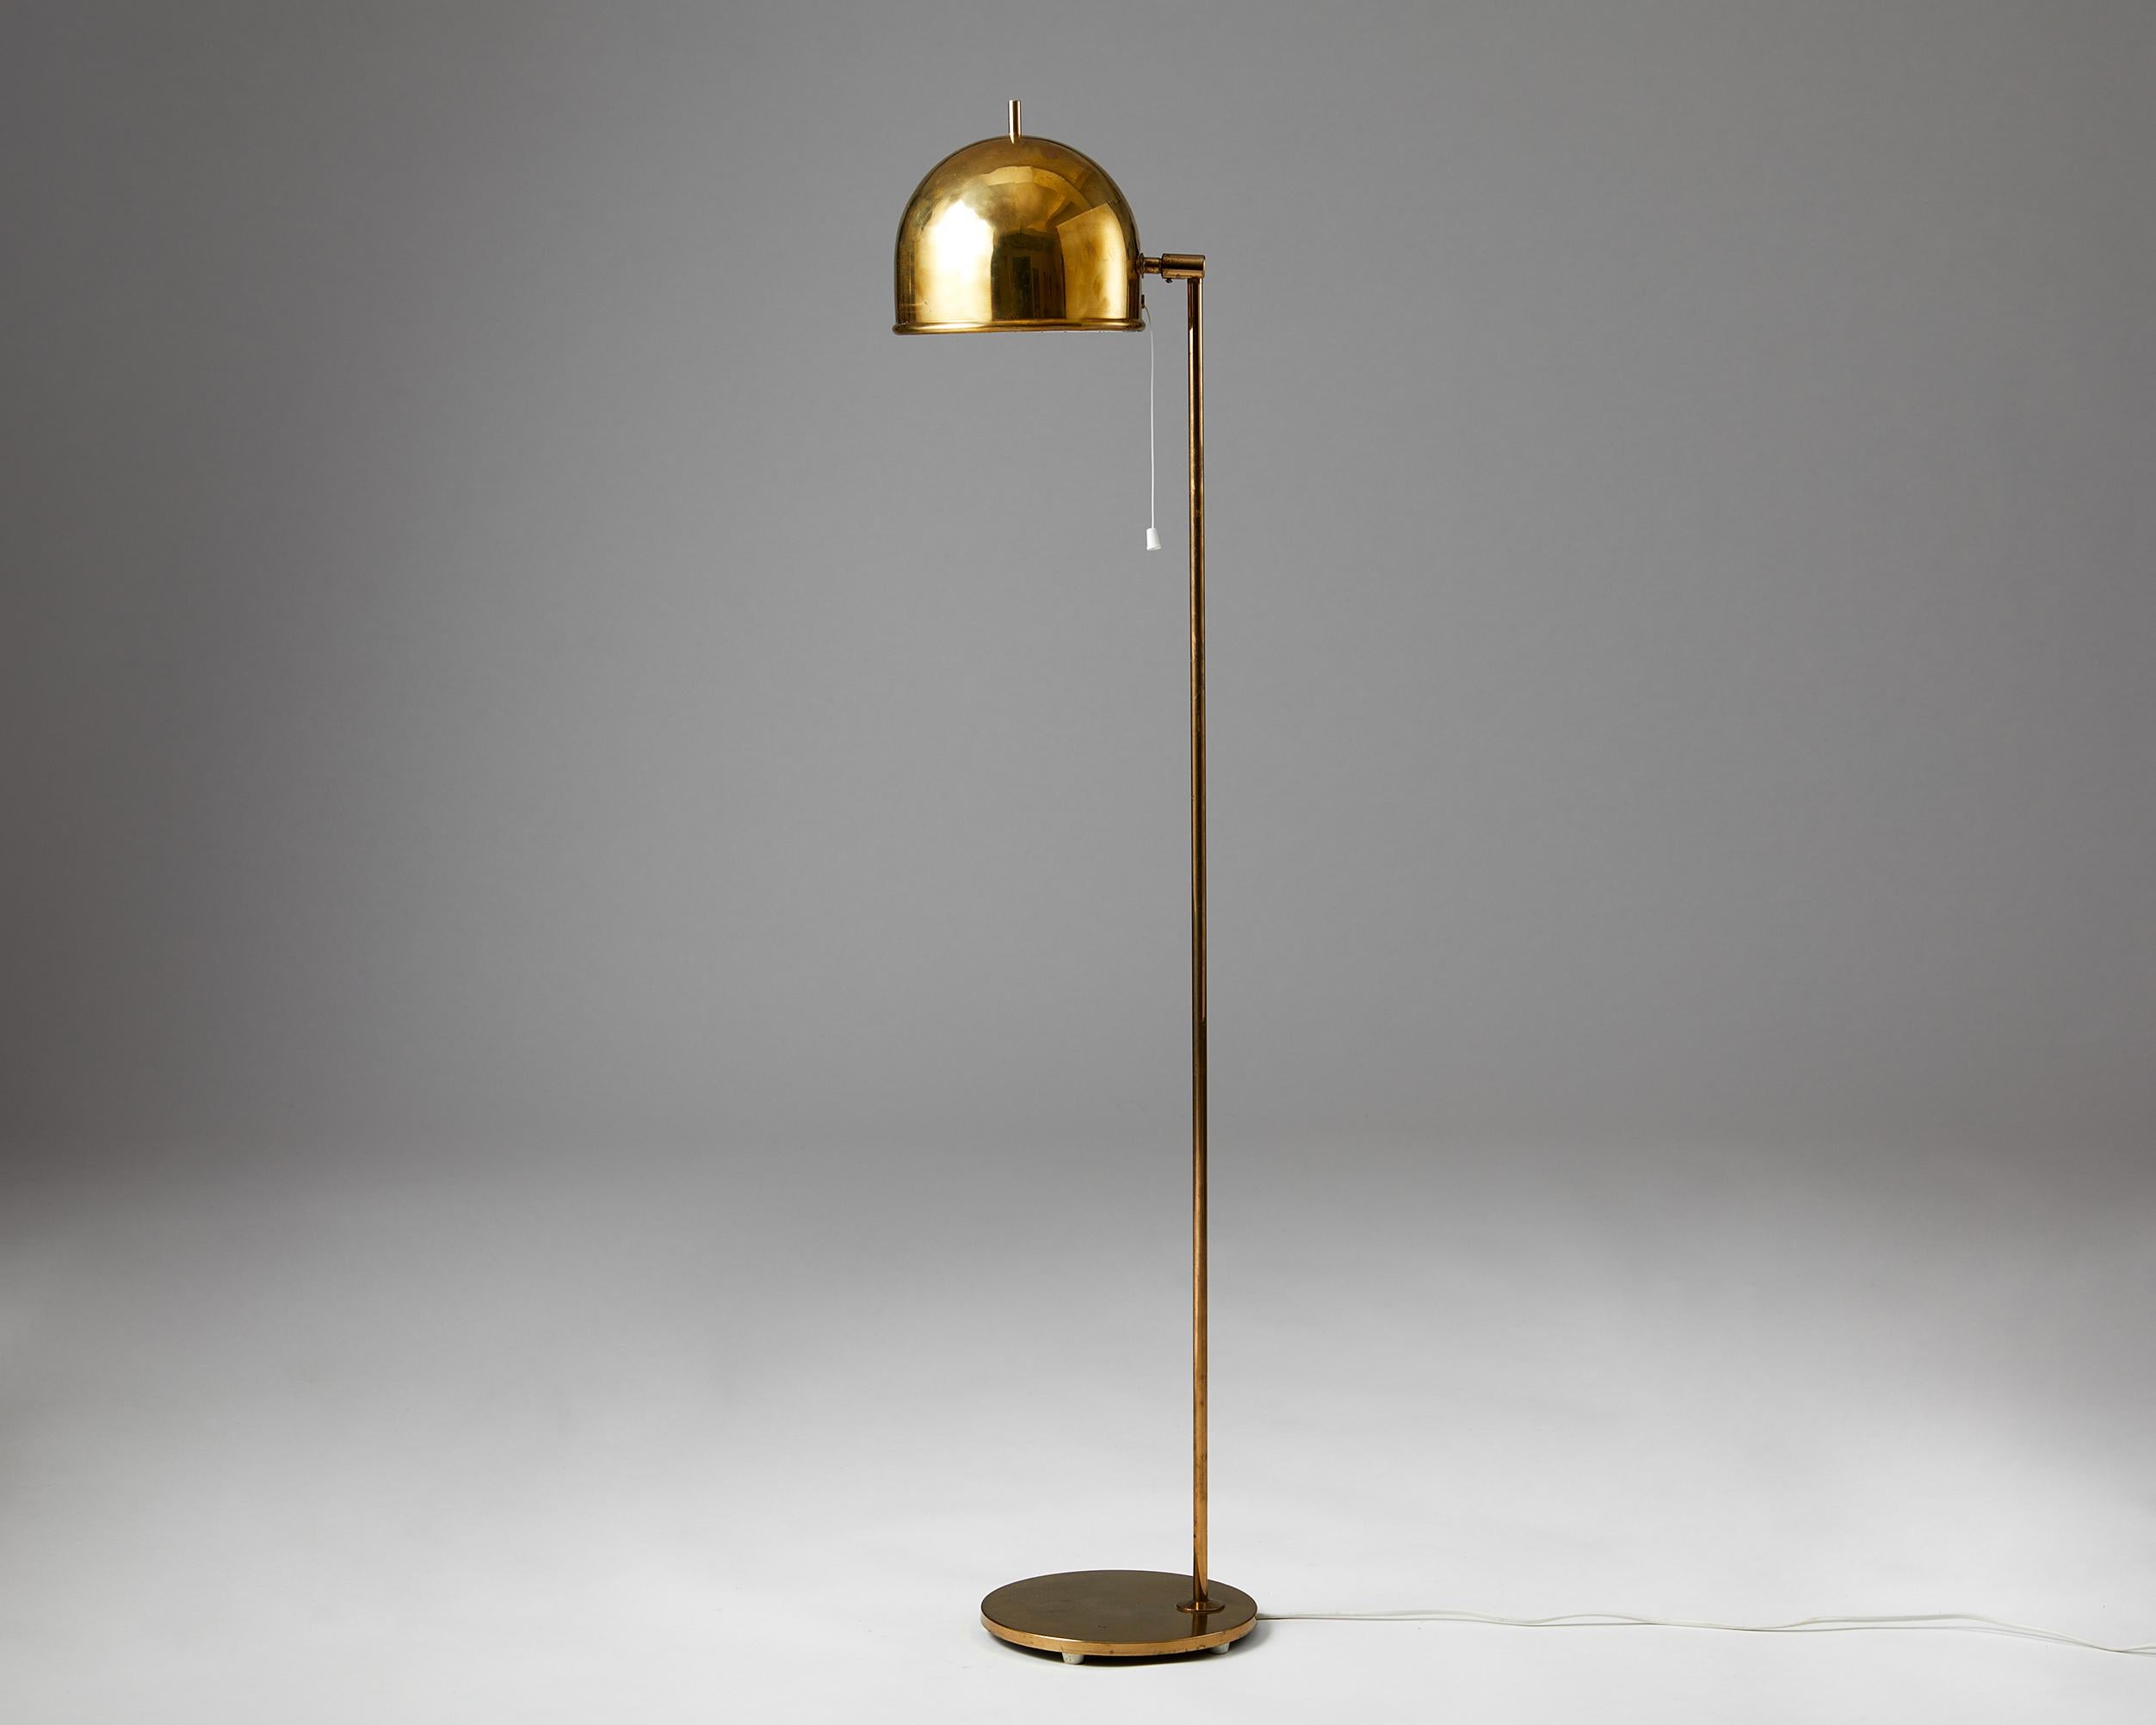 Floor lamp model G-075 designed by Eje Ahlgren for Bergboms,
Sweden. 1960s.
Brass.

This floor lamp with fully adjustable shade was manufactured in brass by Bergboms and designed by Eje Ahlgren. The protruding brass rod at the top of the shade